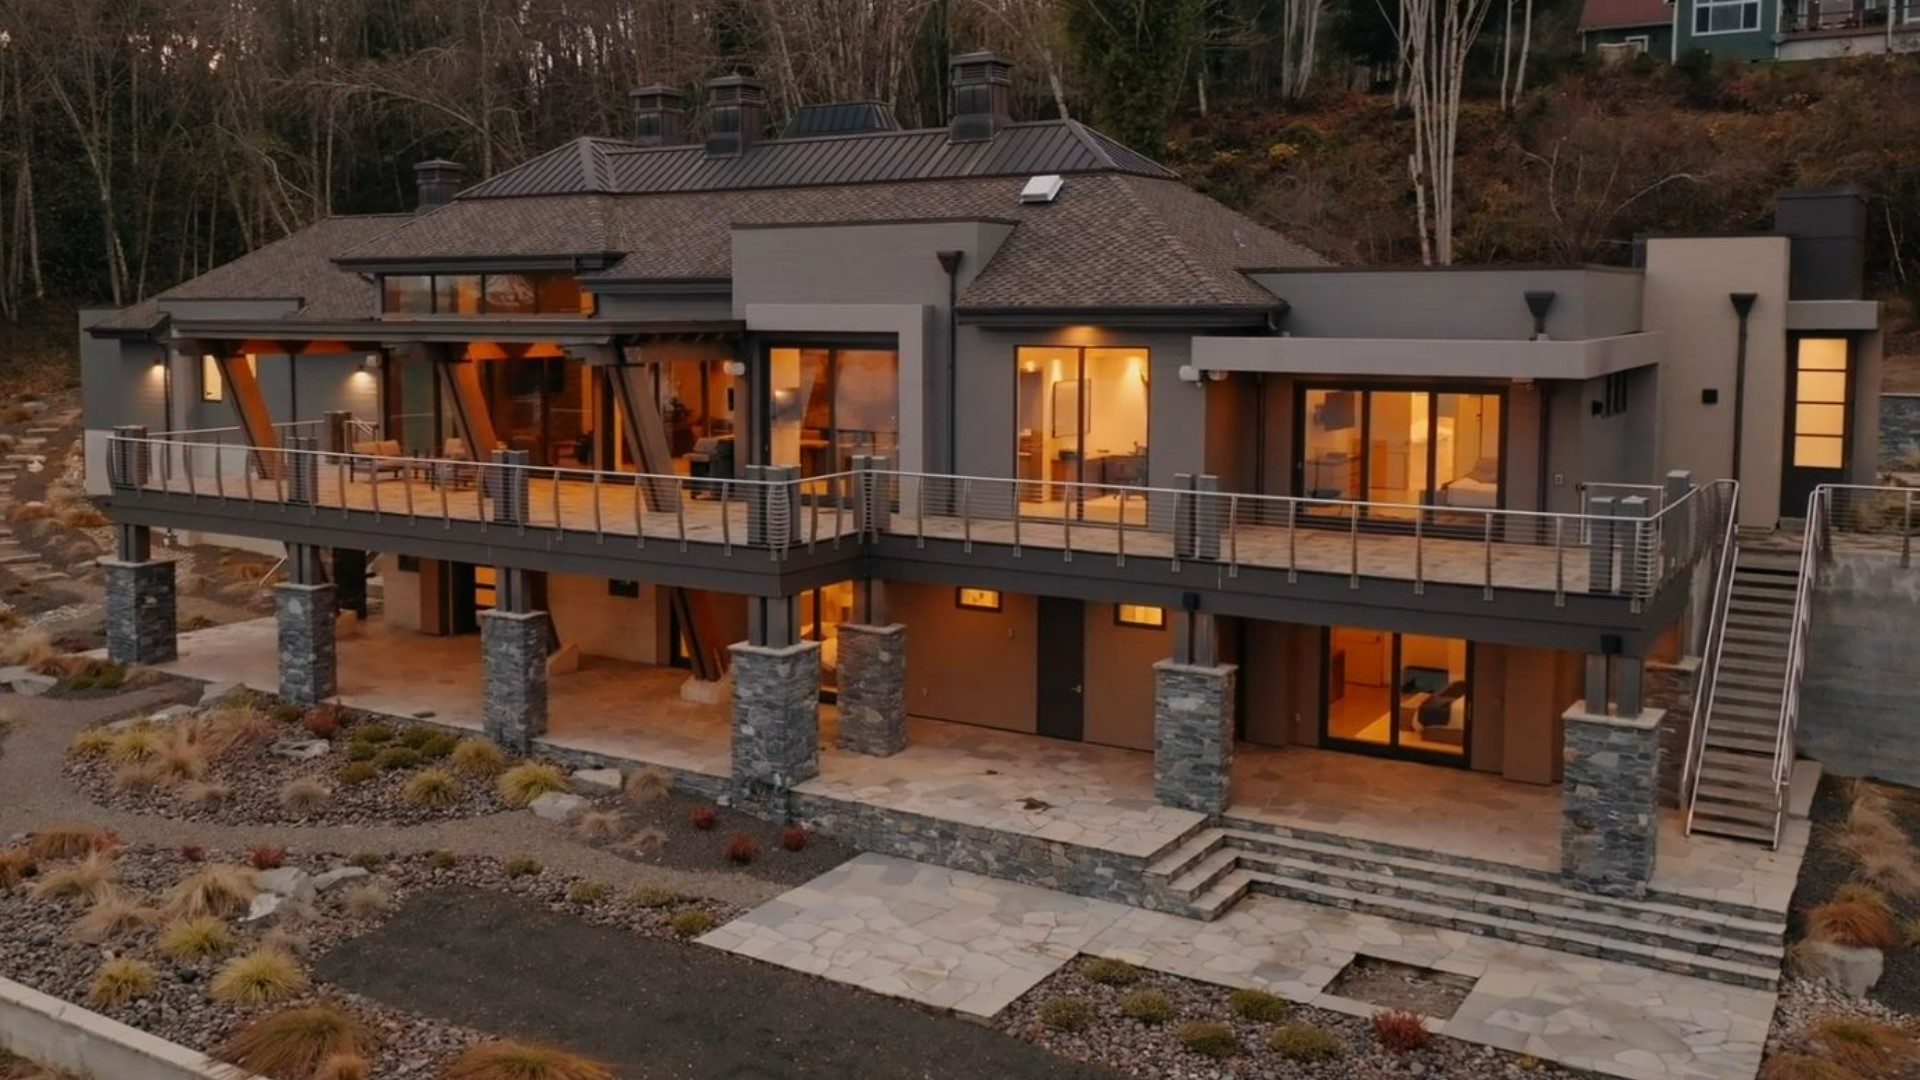 The house has 12-foot windows to make the most of its mountain views. #k5evening